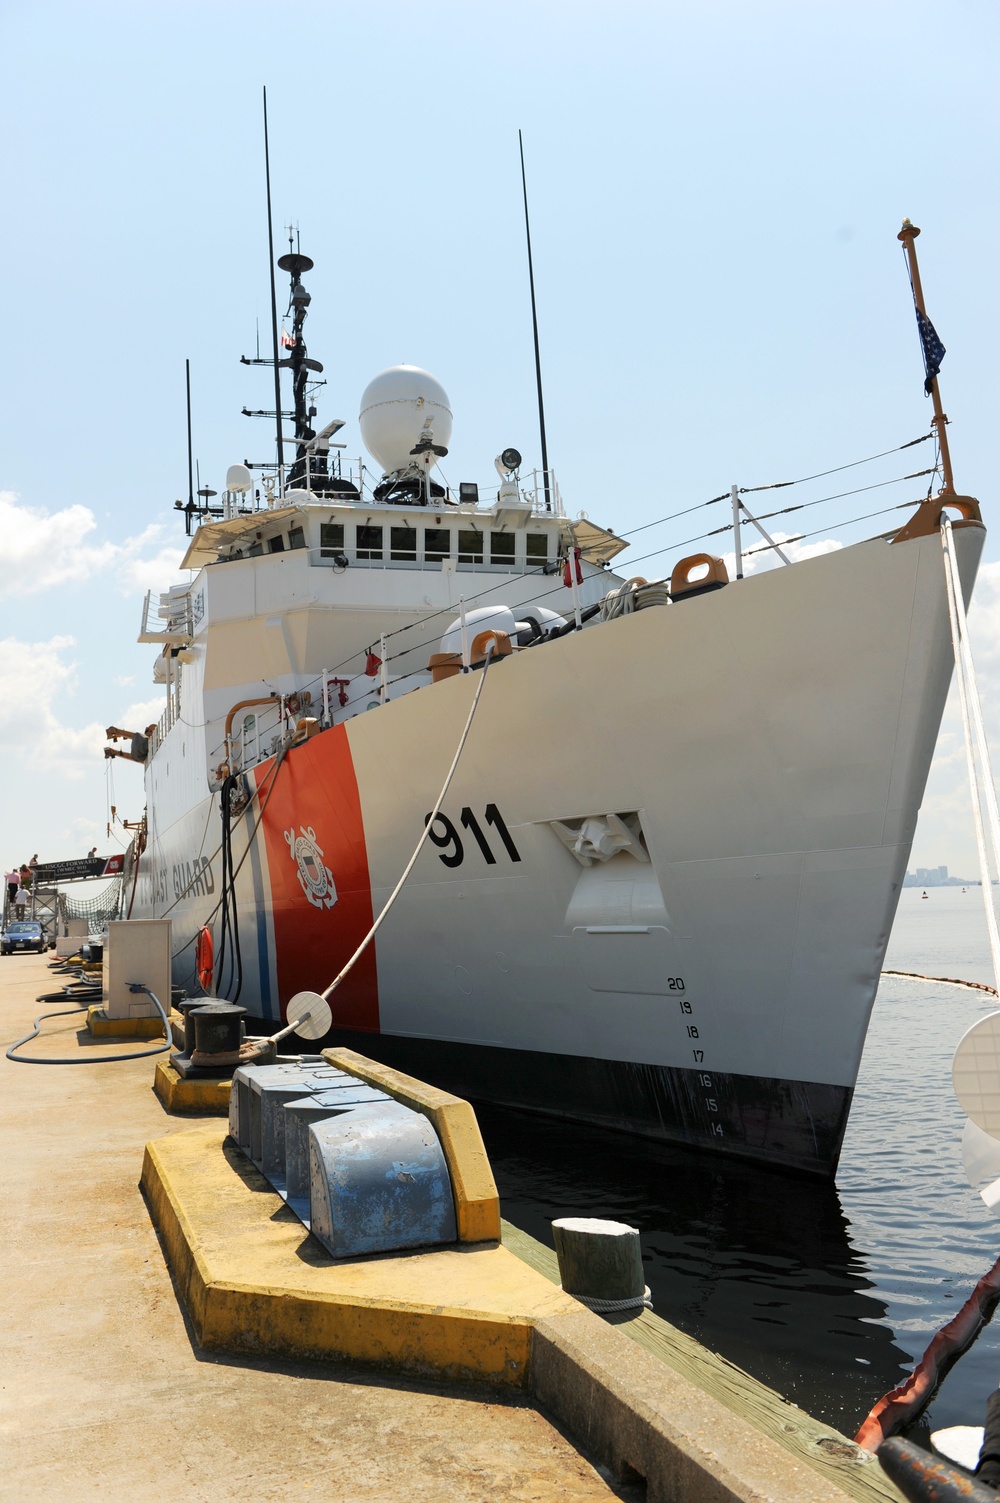 Coast Guard Cutter Forward holds change of command ceremony at Base Portsmouth, Virginia, July 21, 2016